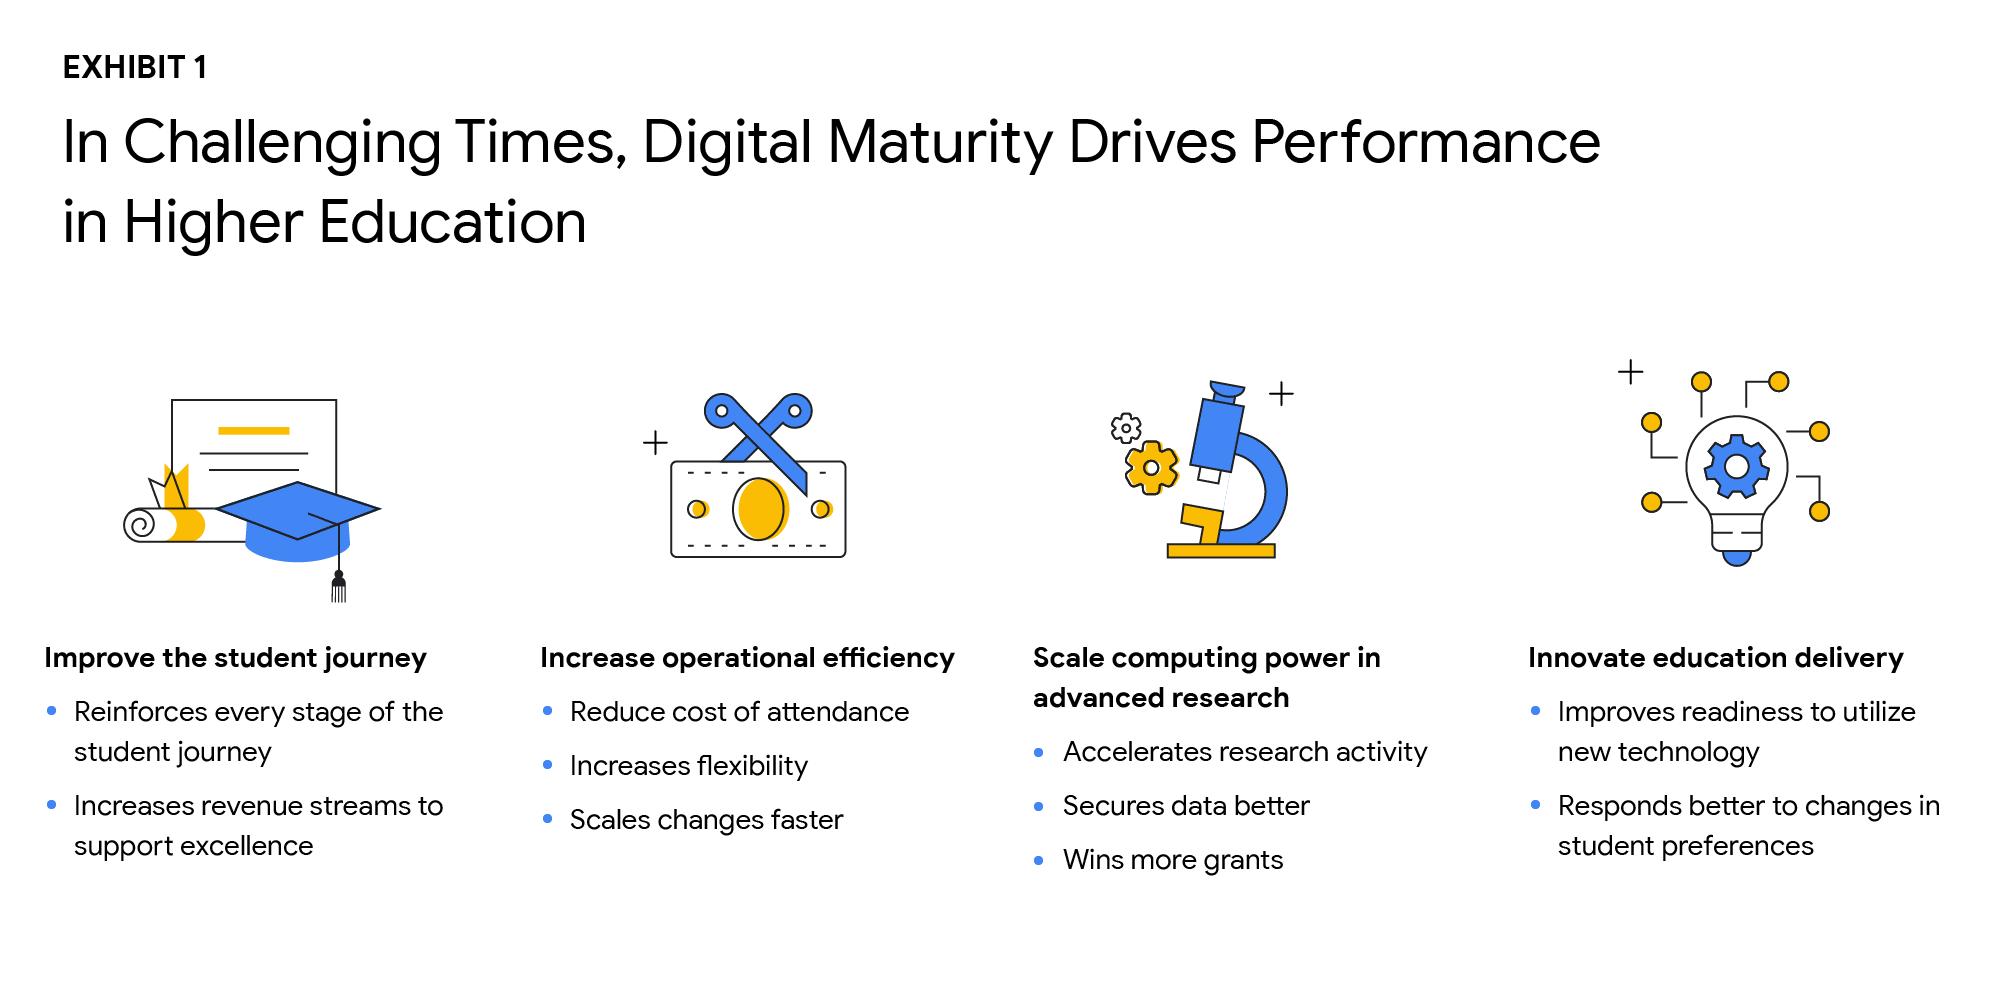 https://storage.googleapis.com/gweb-cloudblog-publish/original_images/Why_Higher_Ed_Needs_to_Go_All-in_on_Digital_-_Inline_1.gif